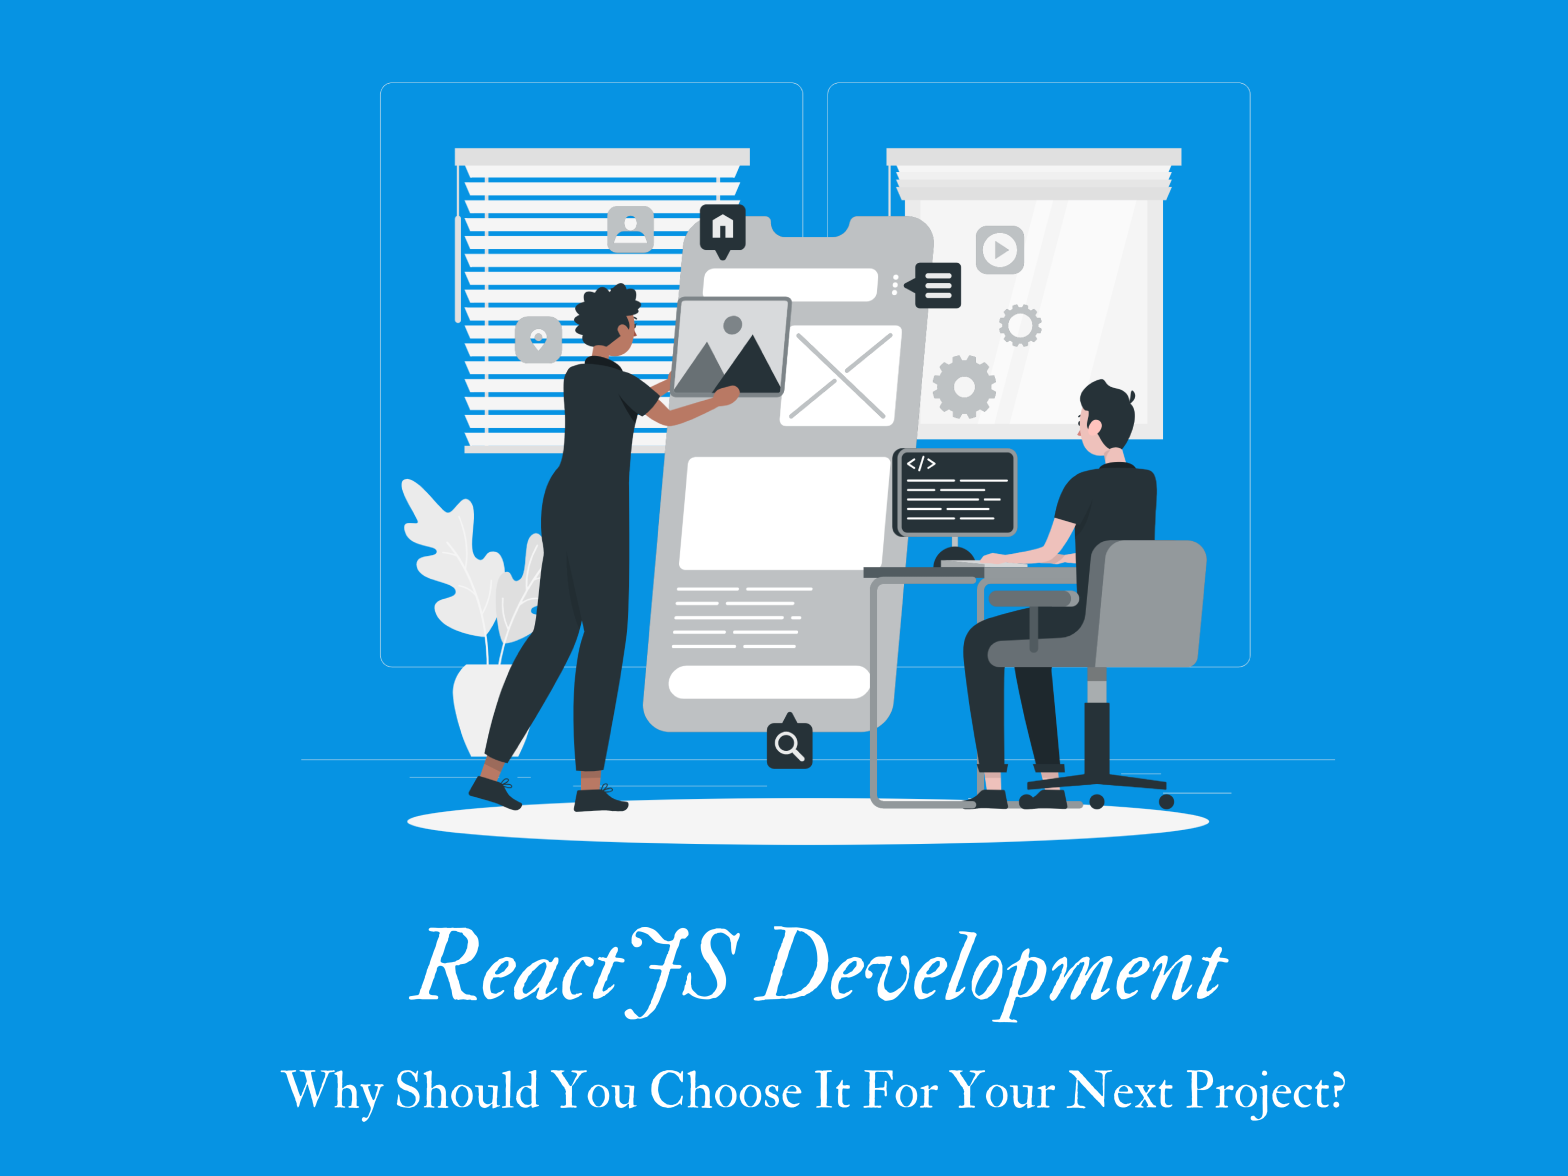 ReactJS Development Services: Why Should You Choose It For Your Next Project?